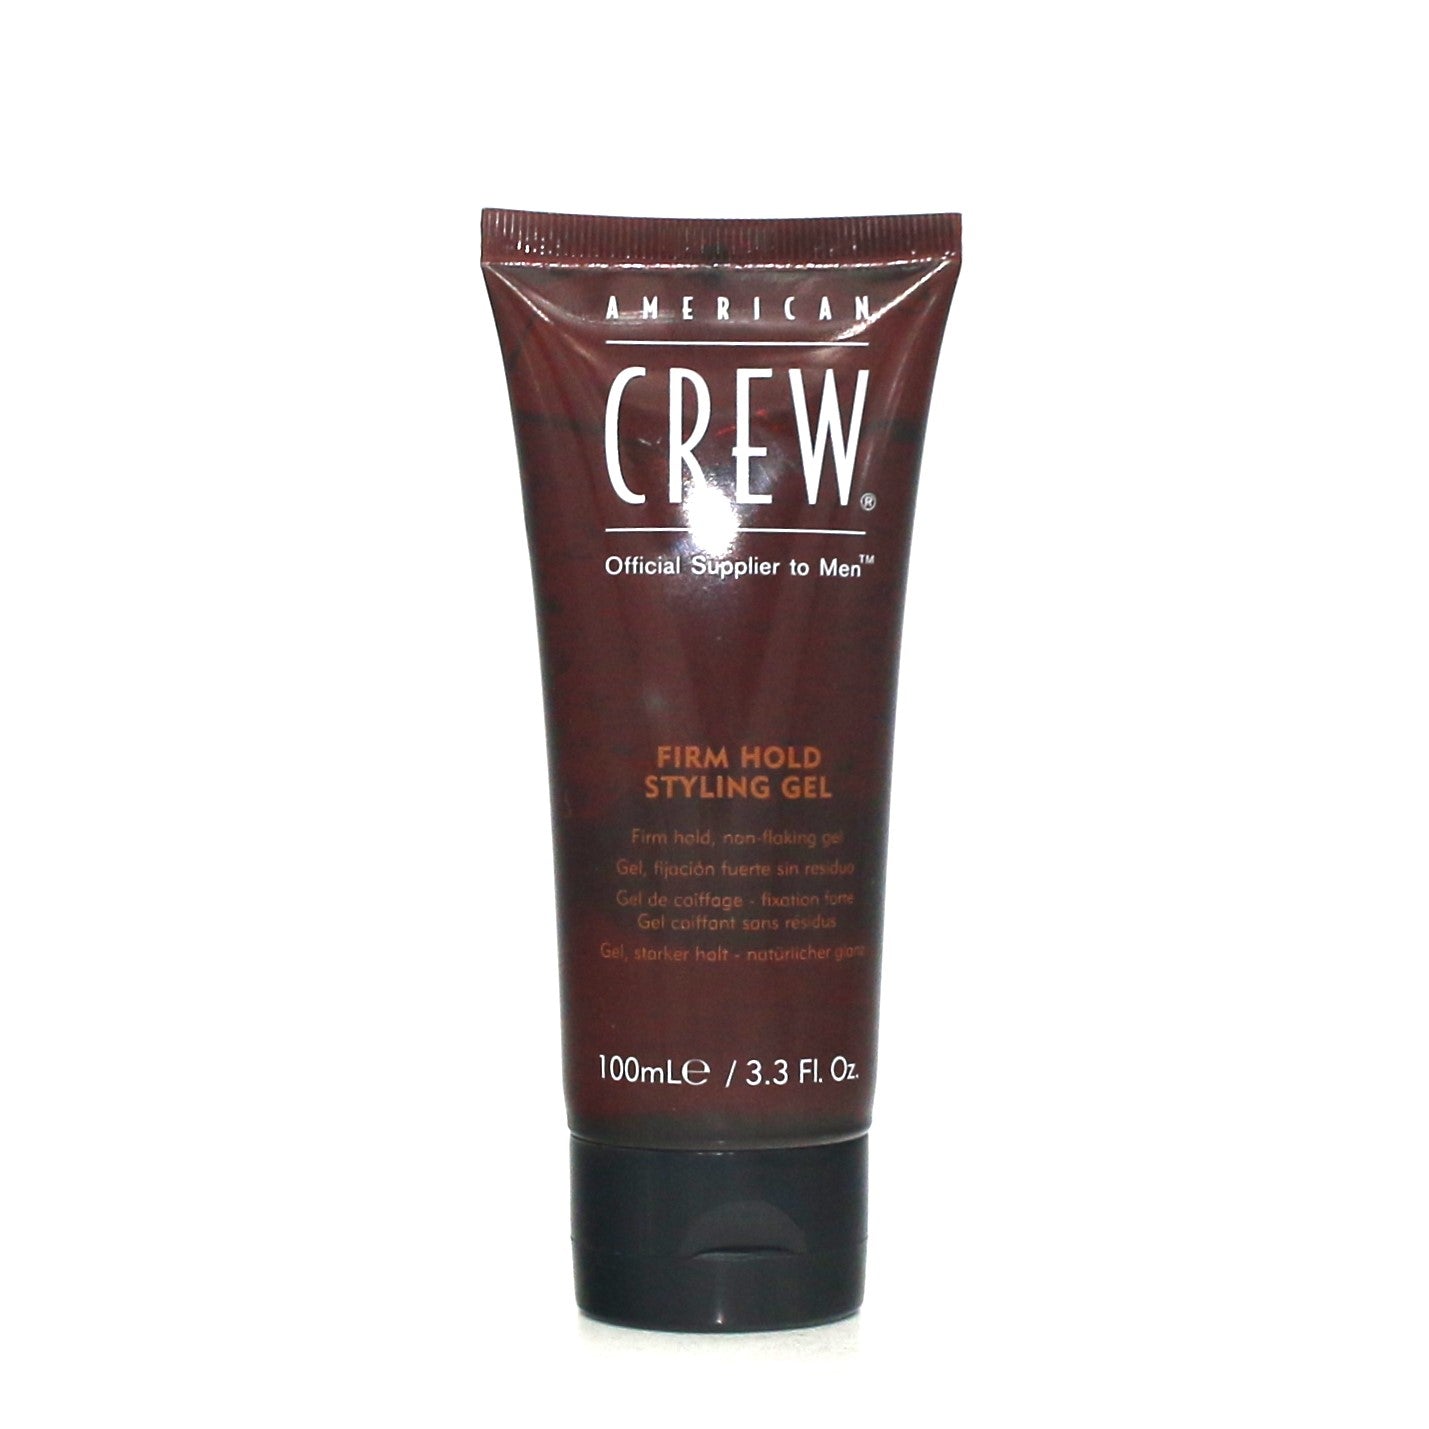 AMERICAN CREW Firm Hold Styling Gel 3.3 oz (Pack of 2)